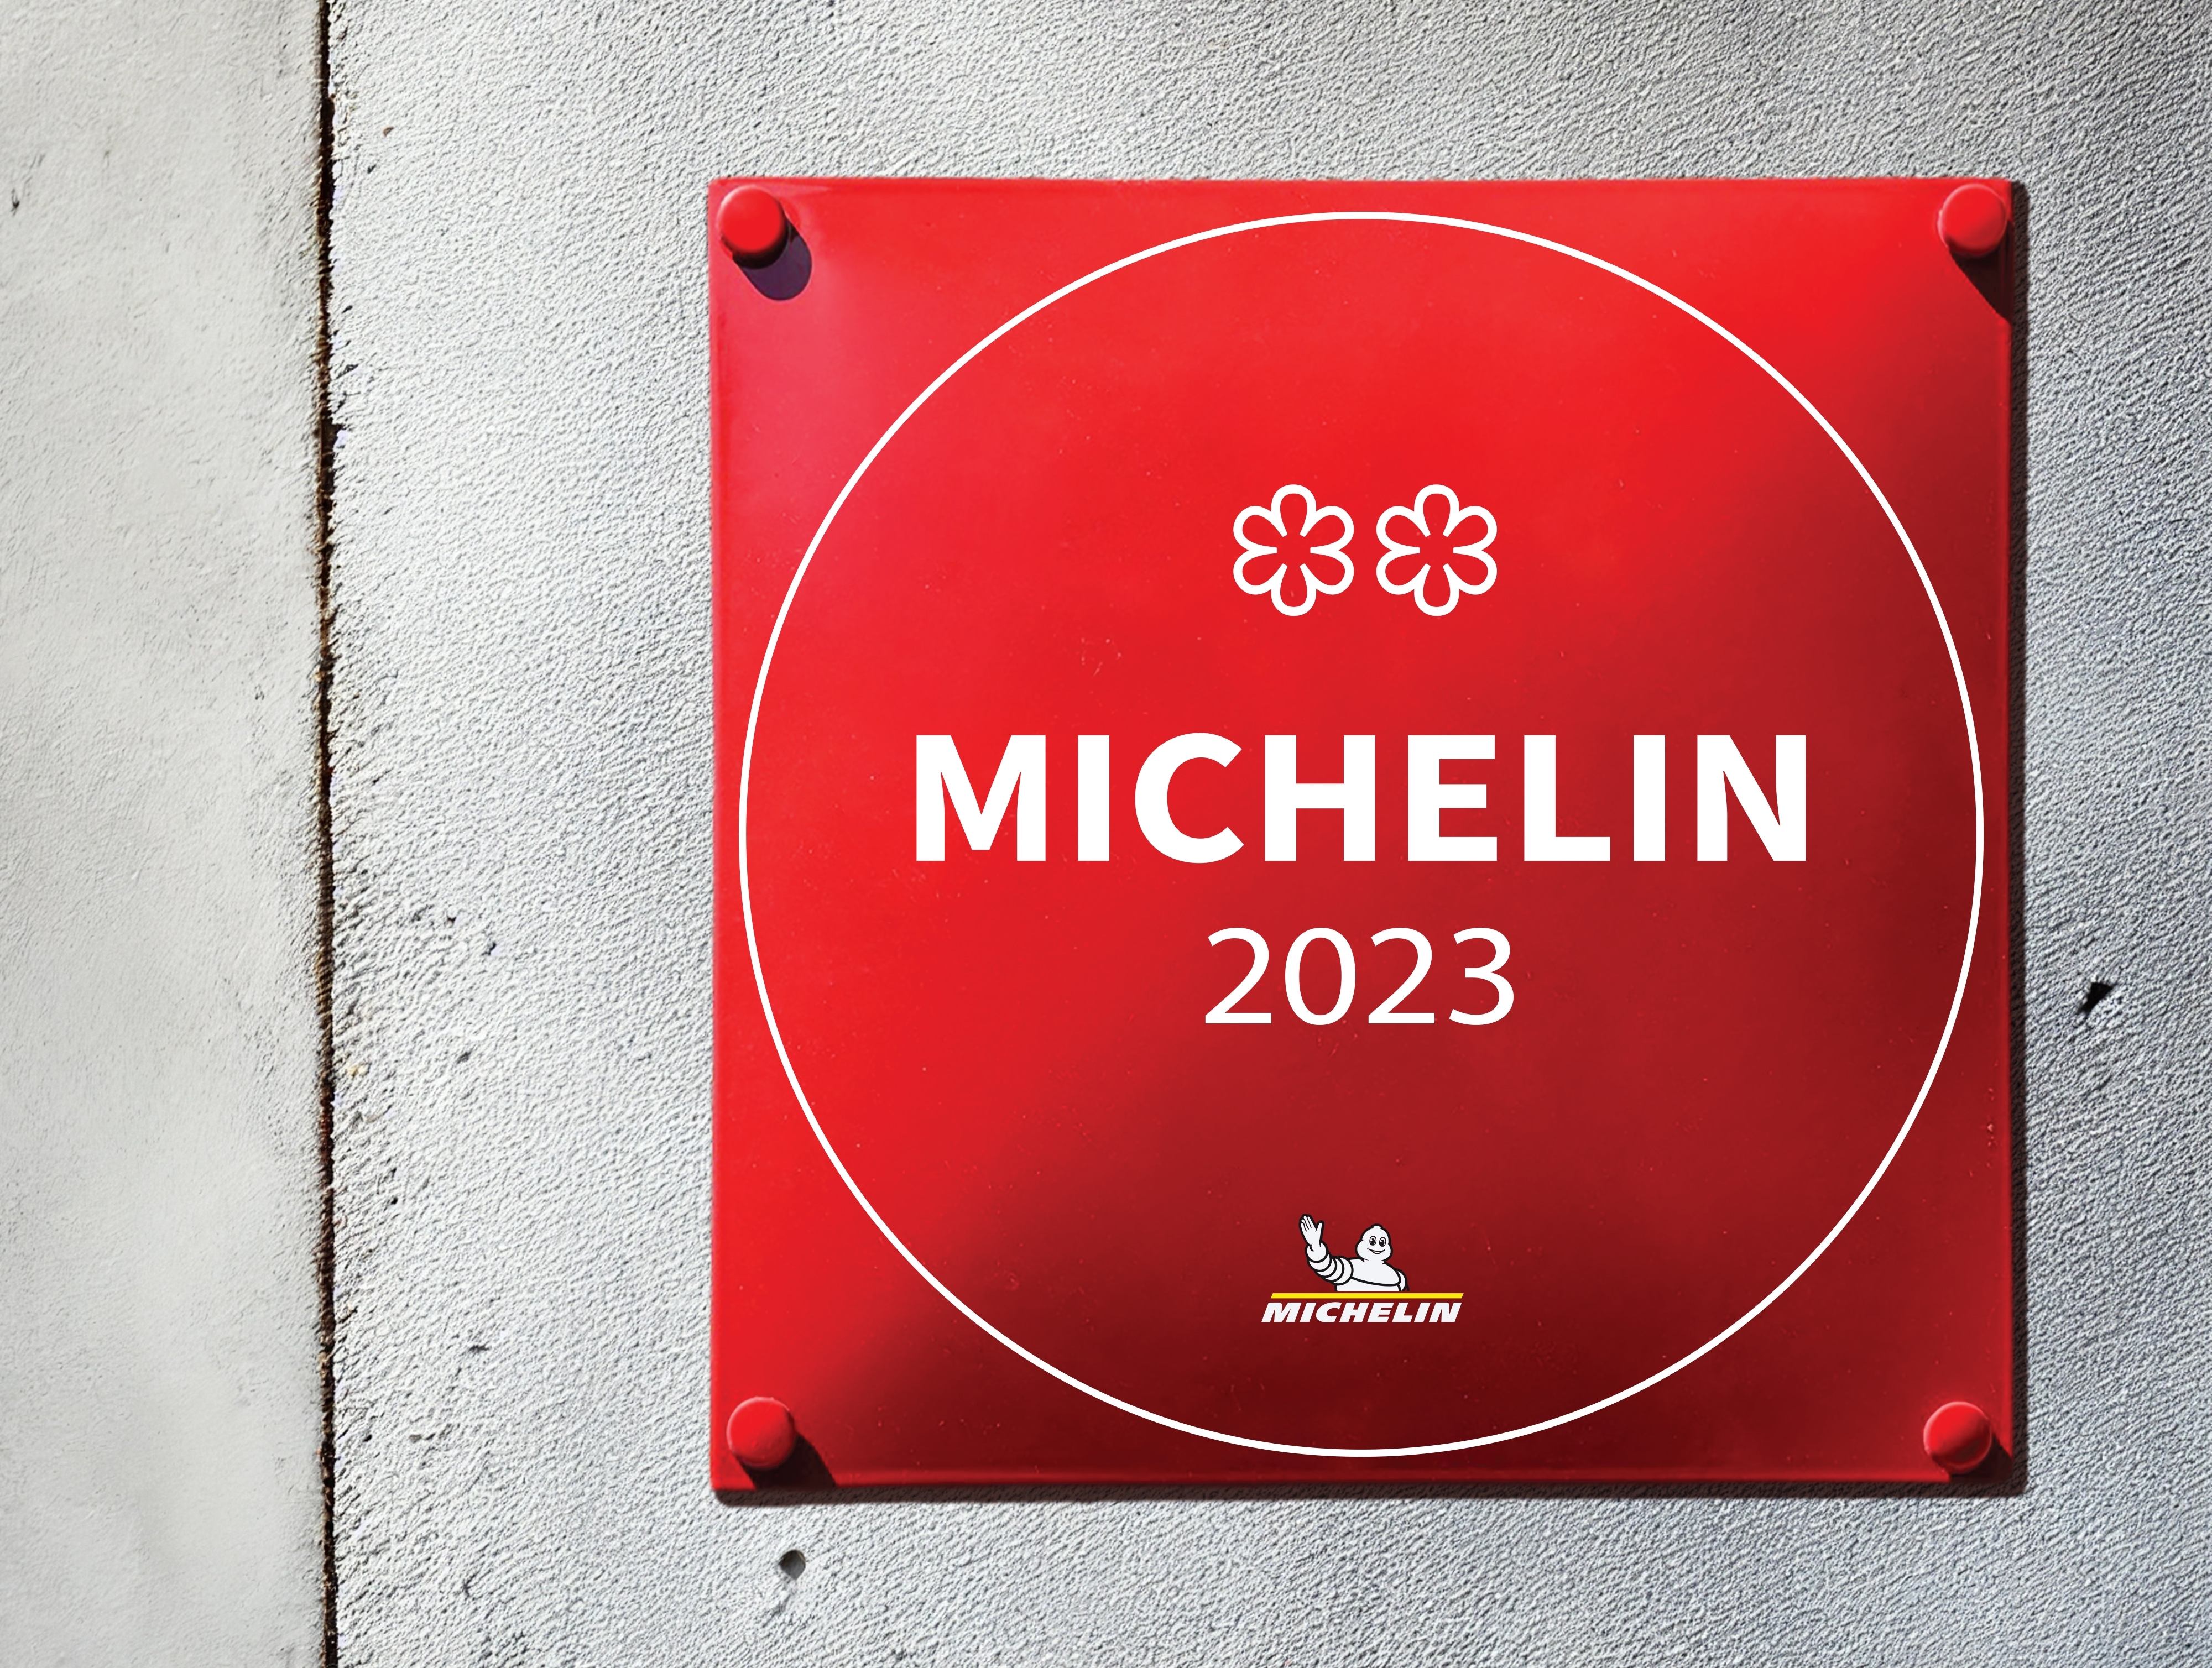 A Michelin sign.